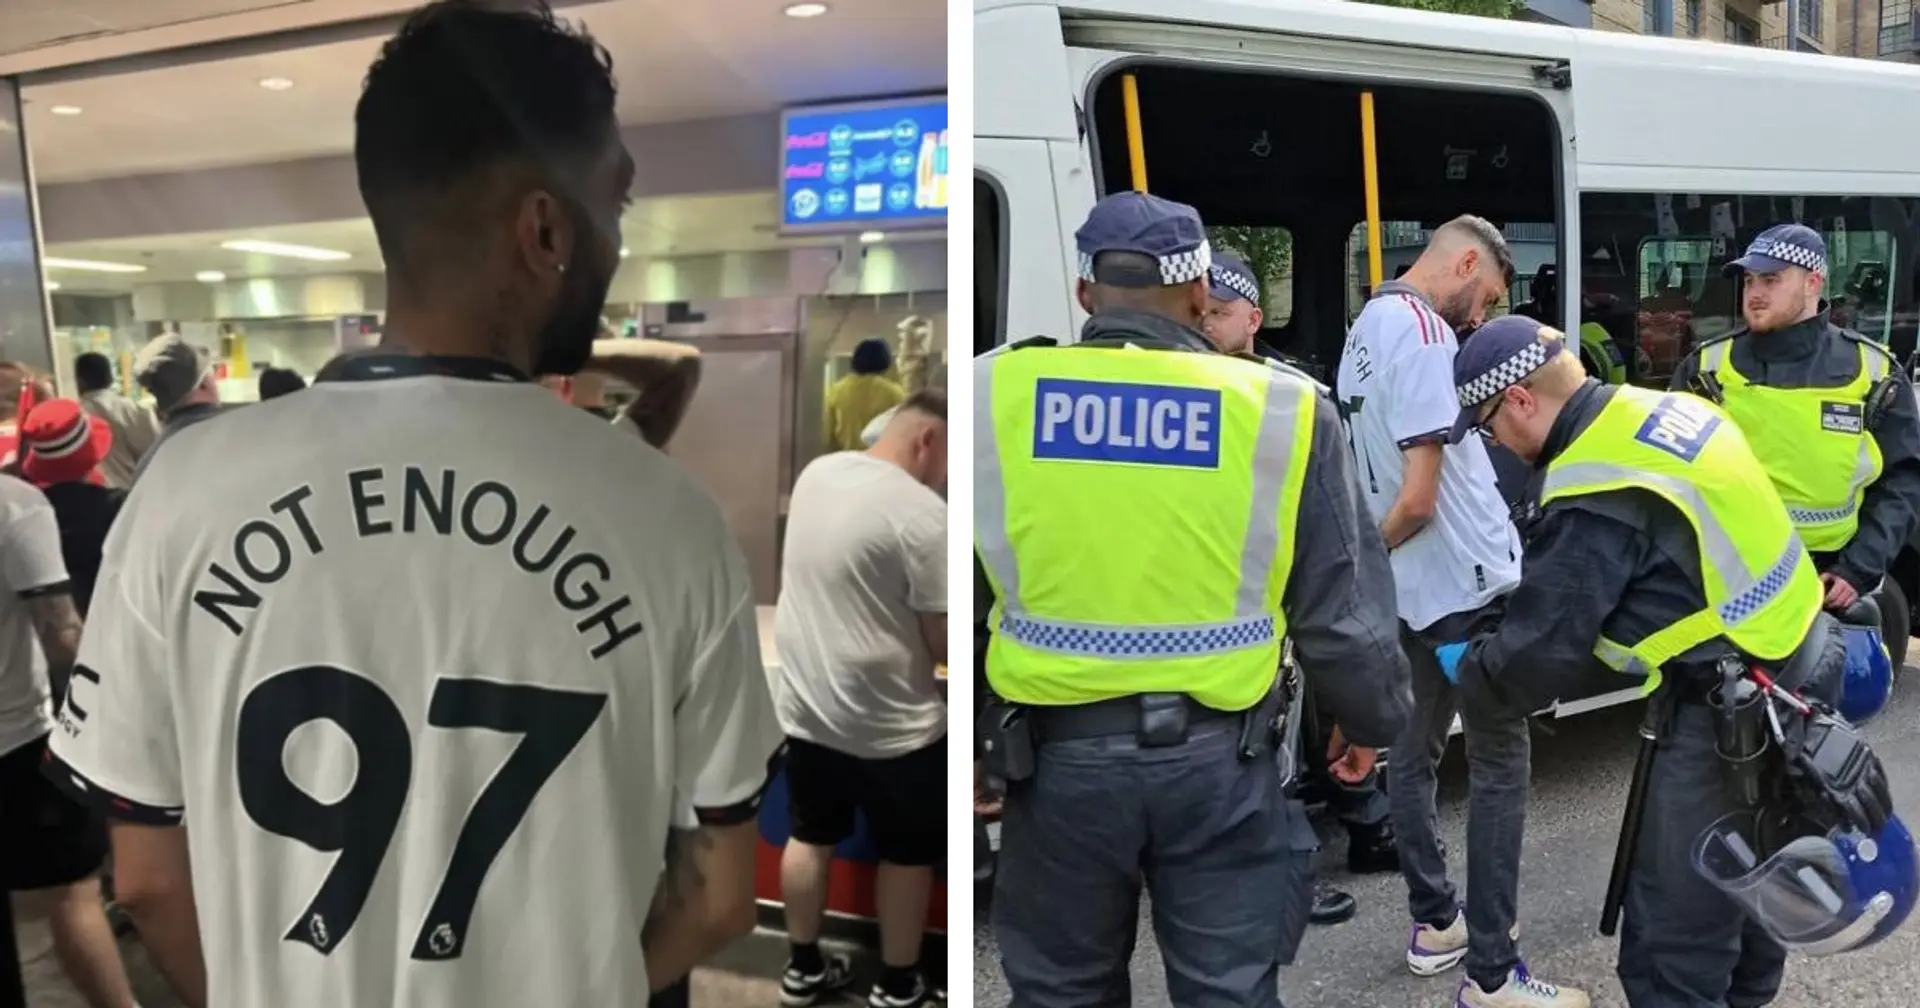 Man United fan wears '97 NOT ENOUGH' shirt to FA Cup final, gets arrested